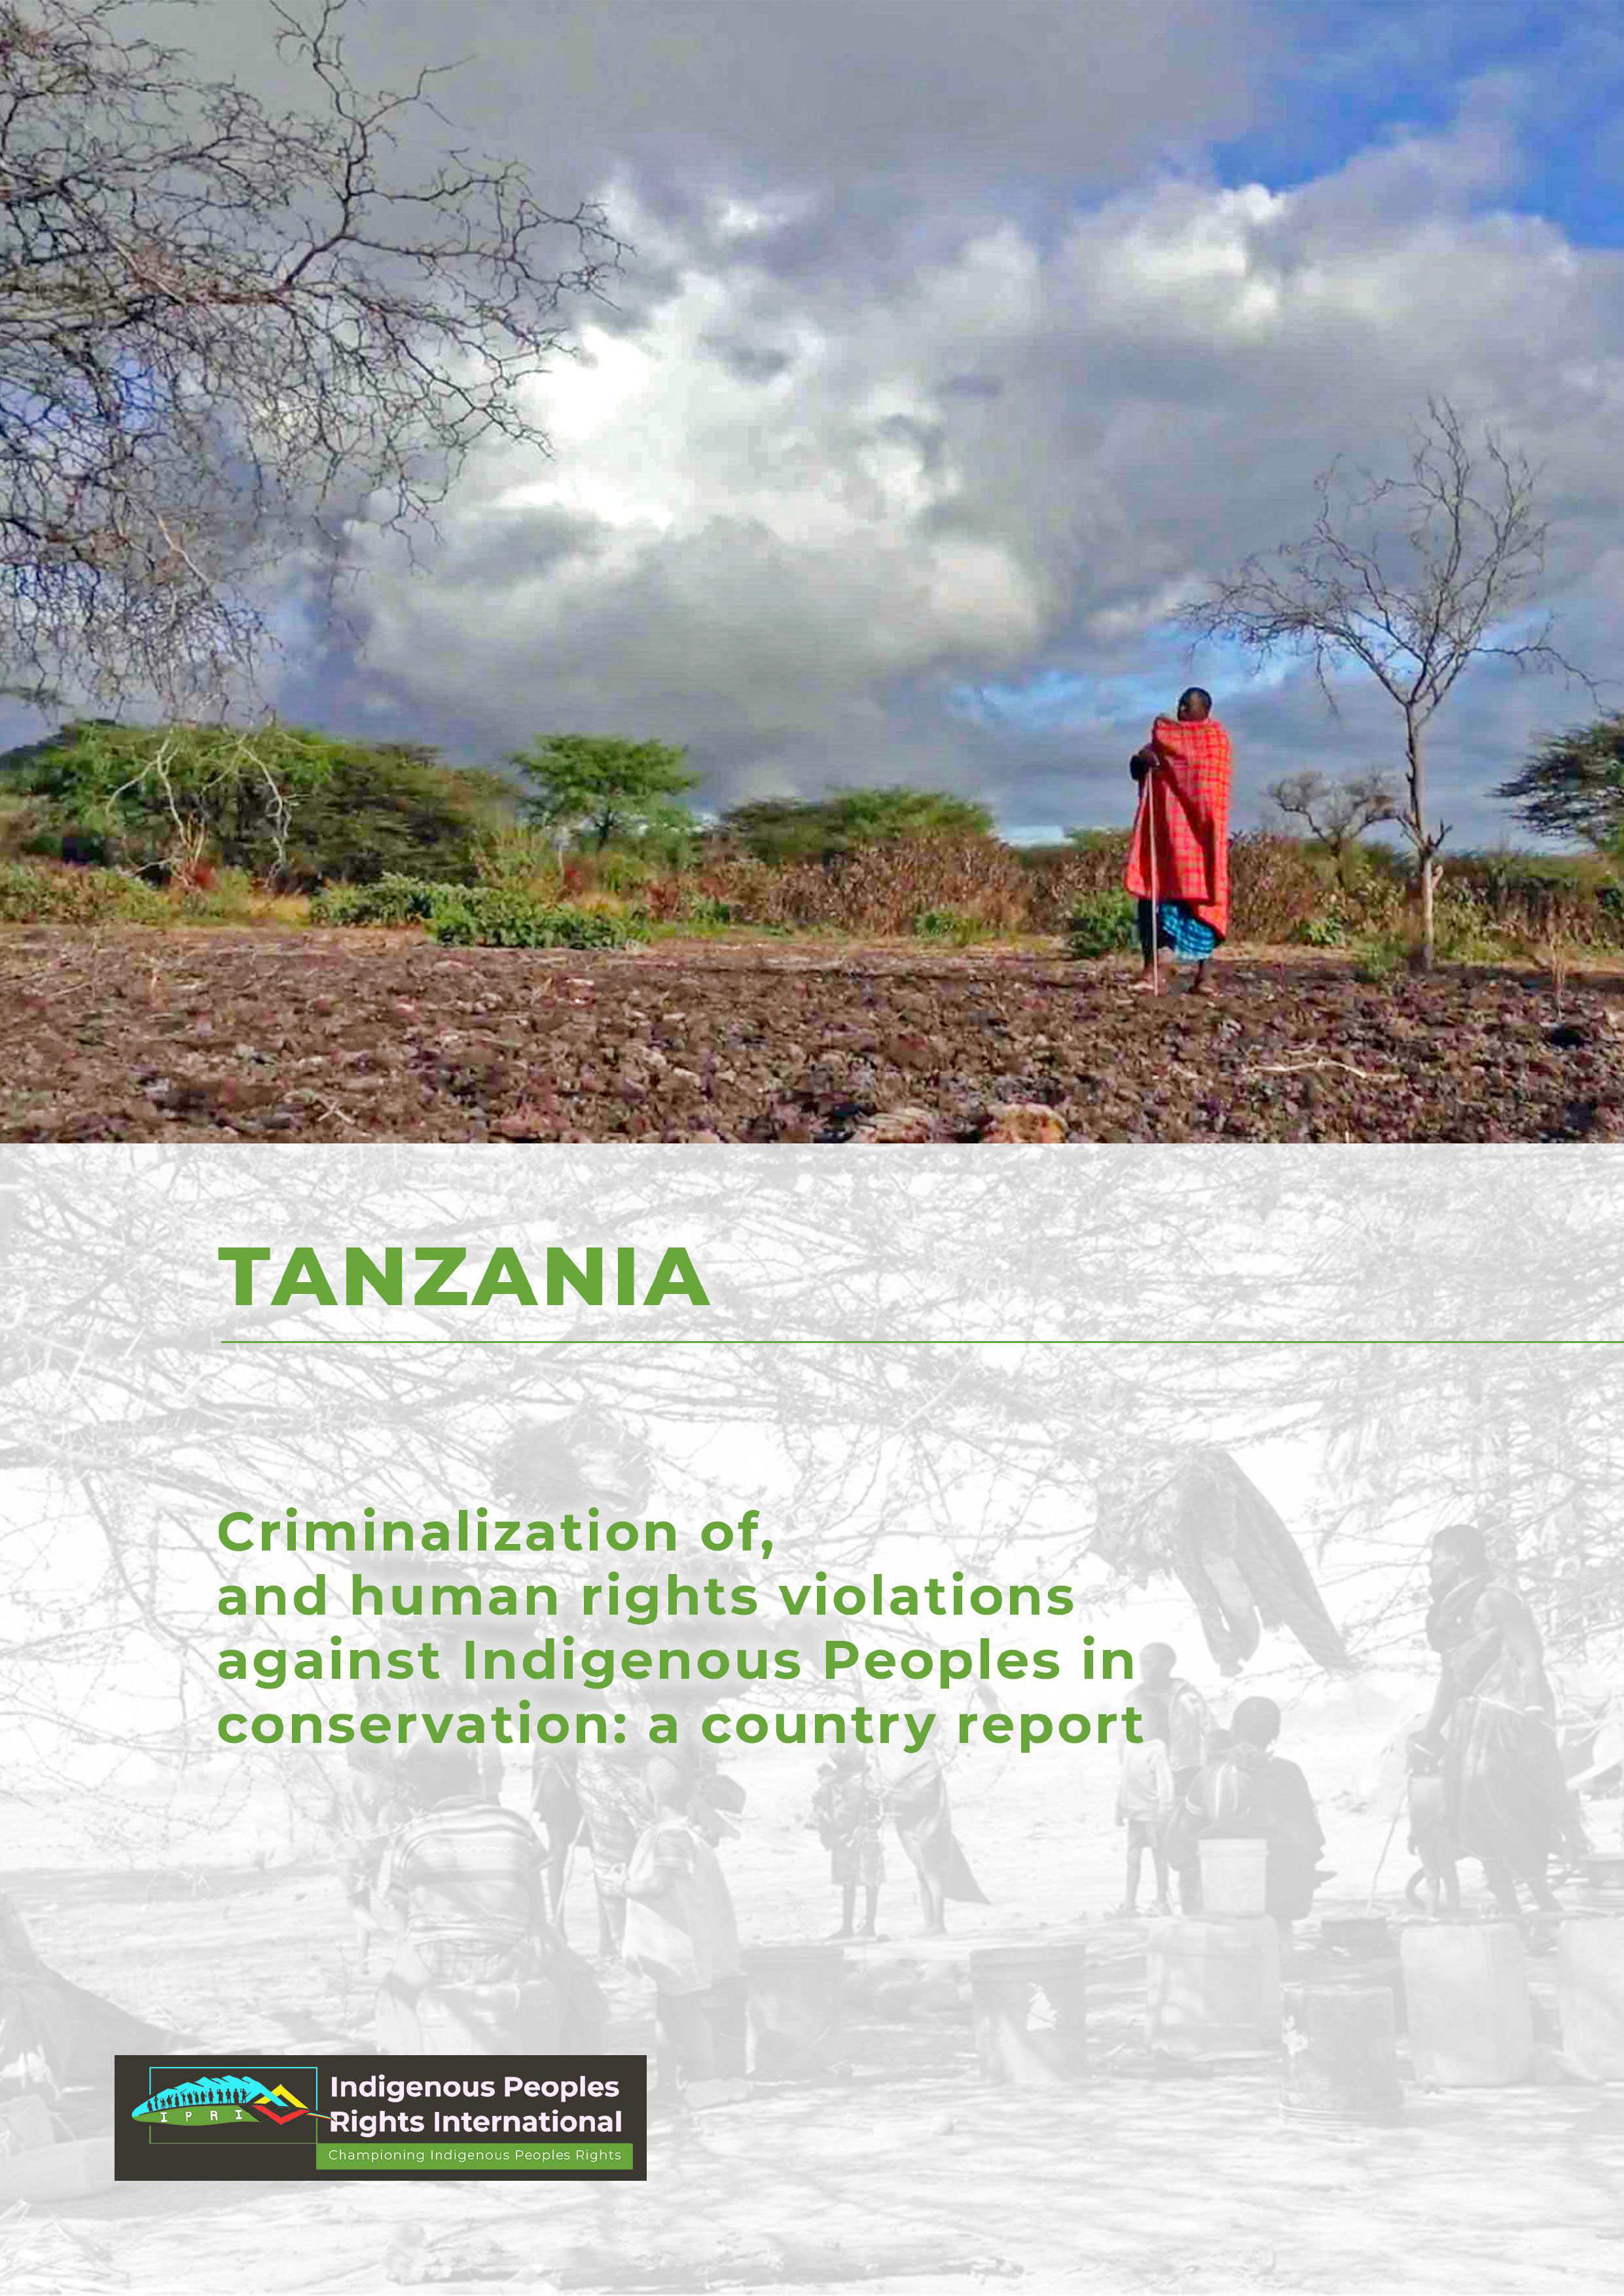 TANZANIA || Criminalization of, and human rights violations against Indigenous Peoples in conservation: a country report